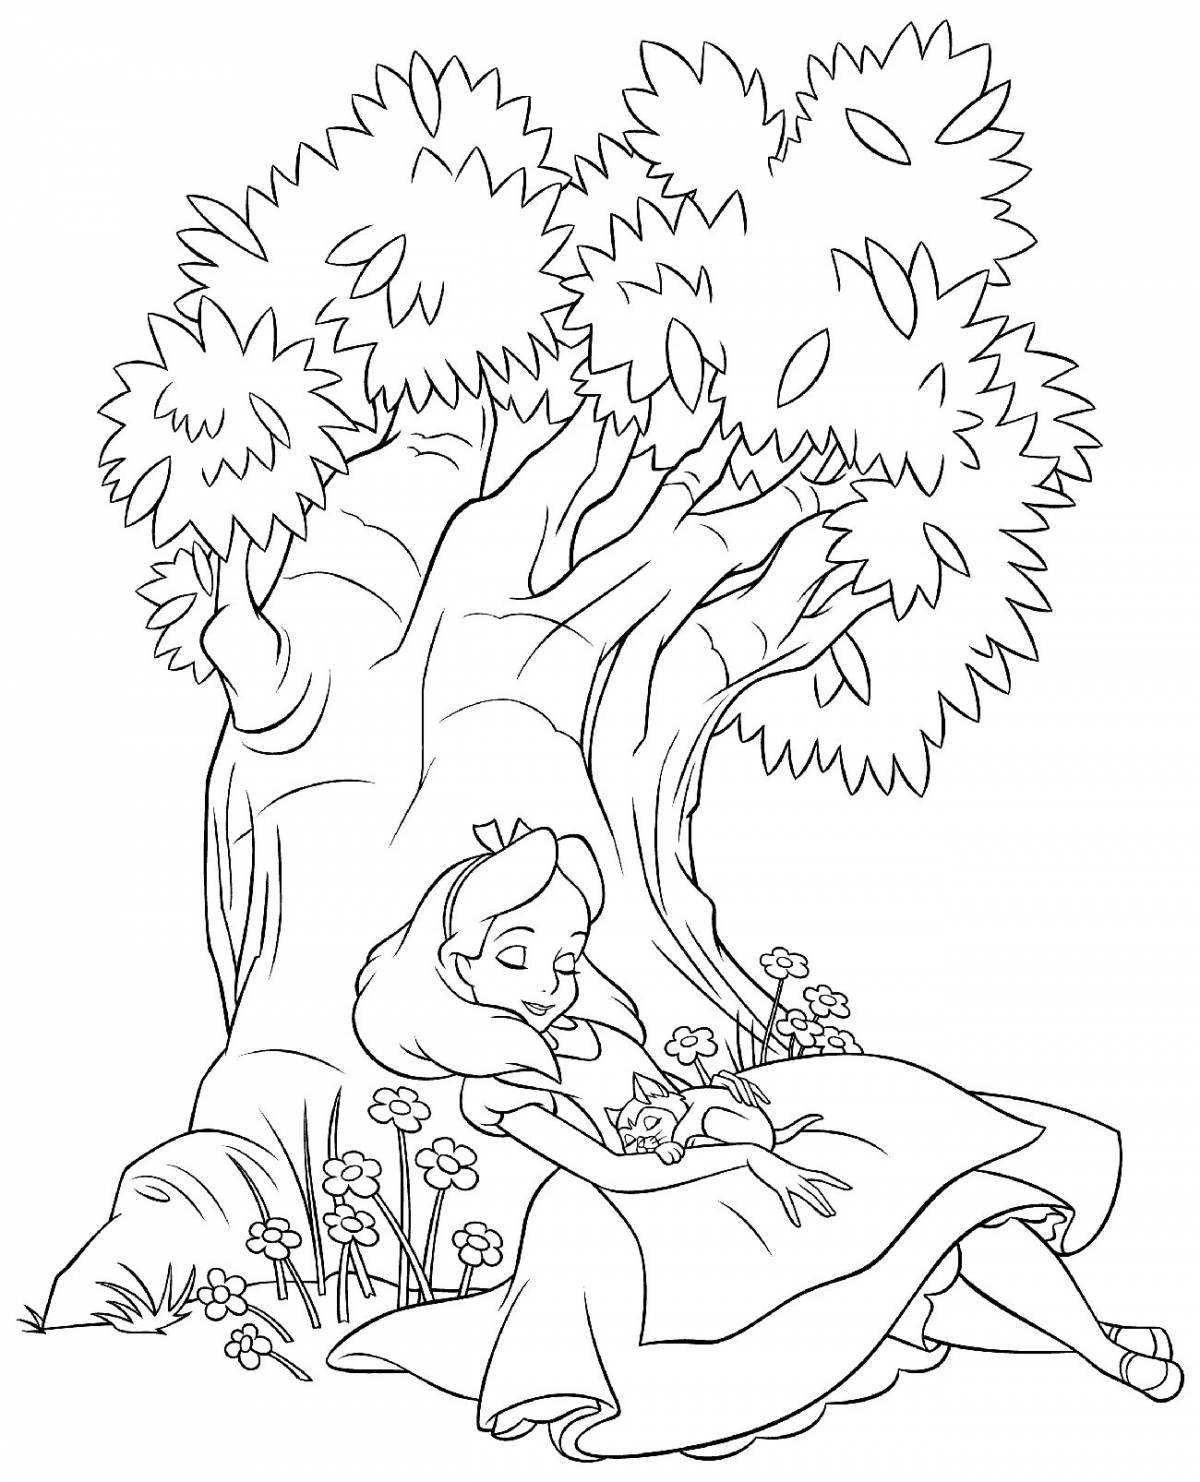 Colorful coloring page alice excitement for boys